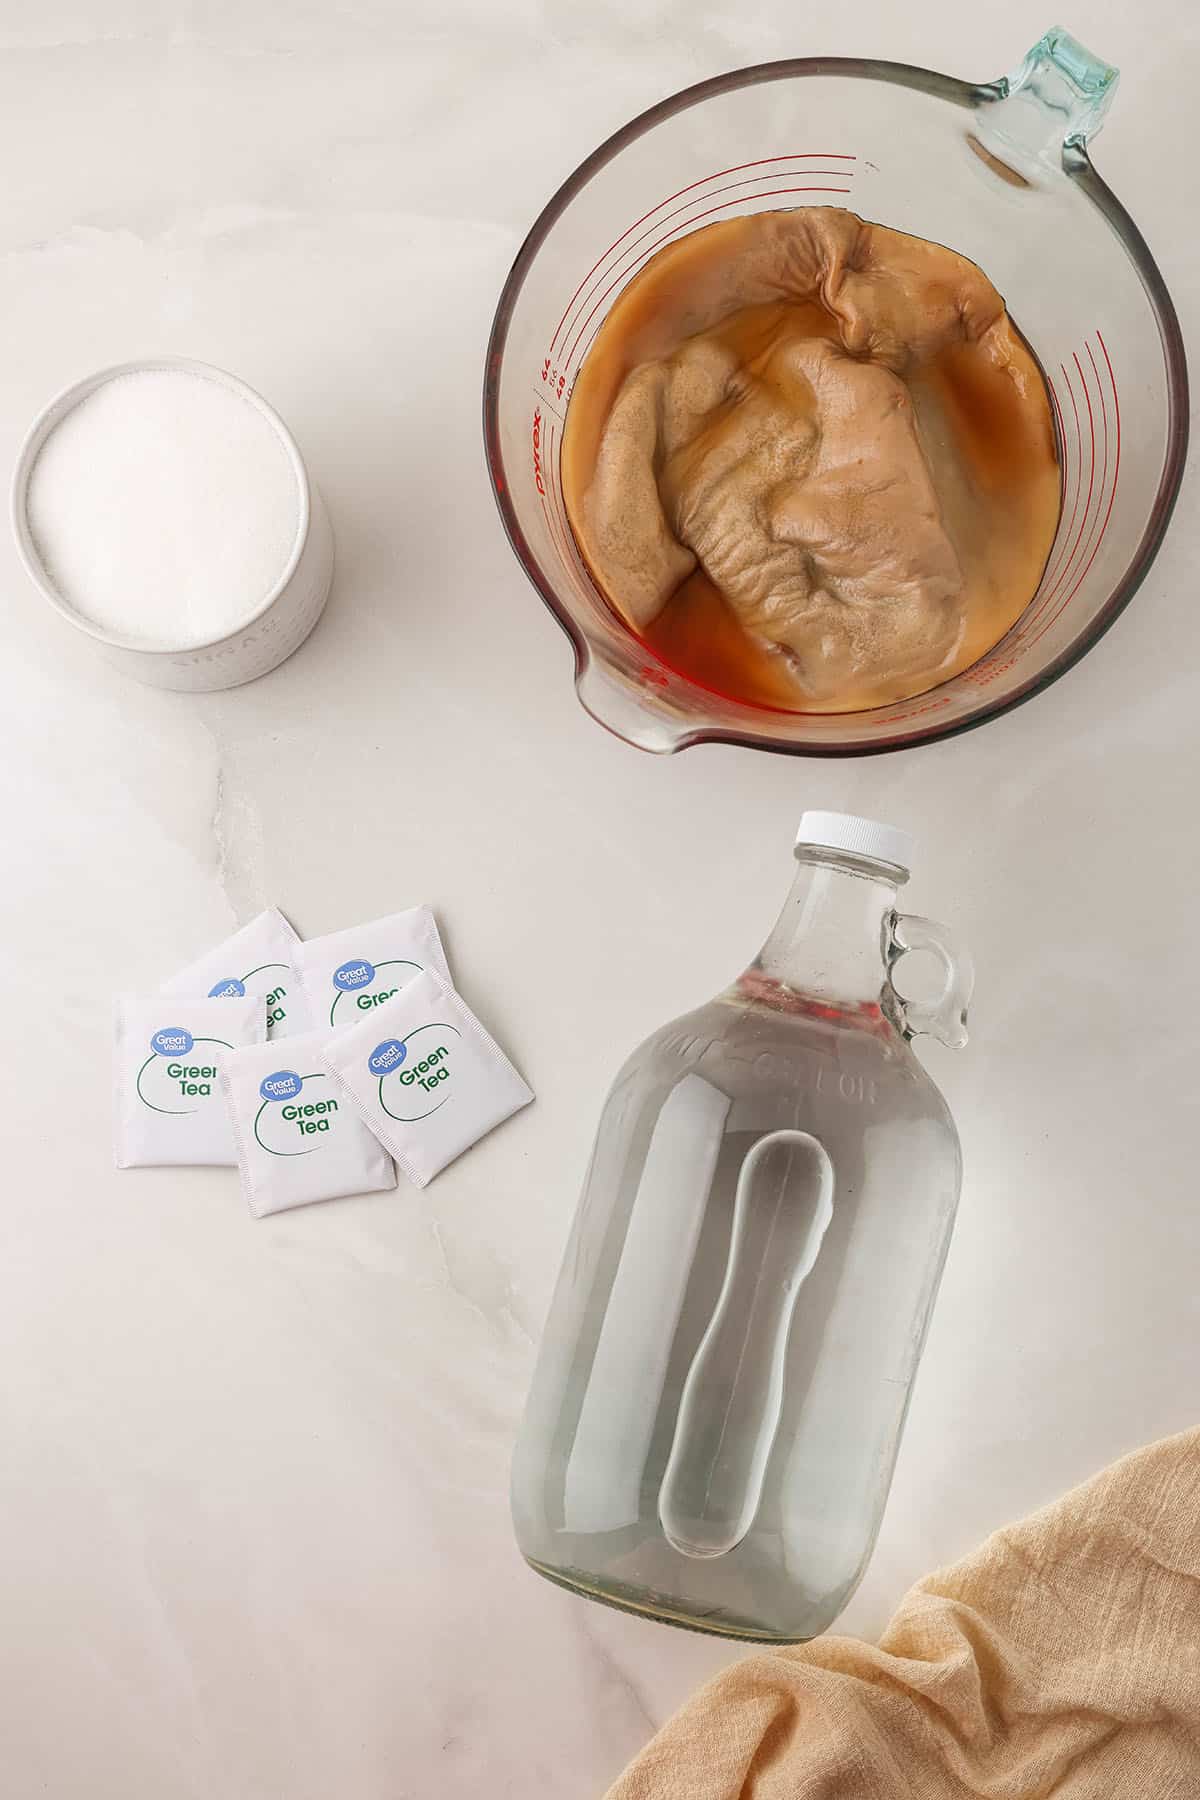 A glass bottle of water on its side, green tea bags, a scoby in a glass pyrex, and sugar in a dish, top view. 